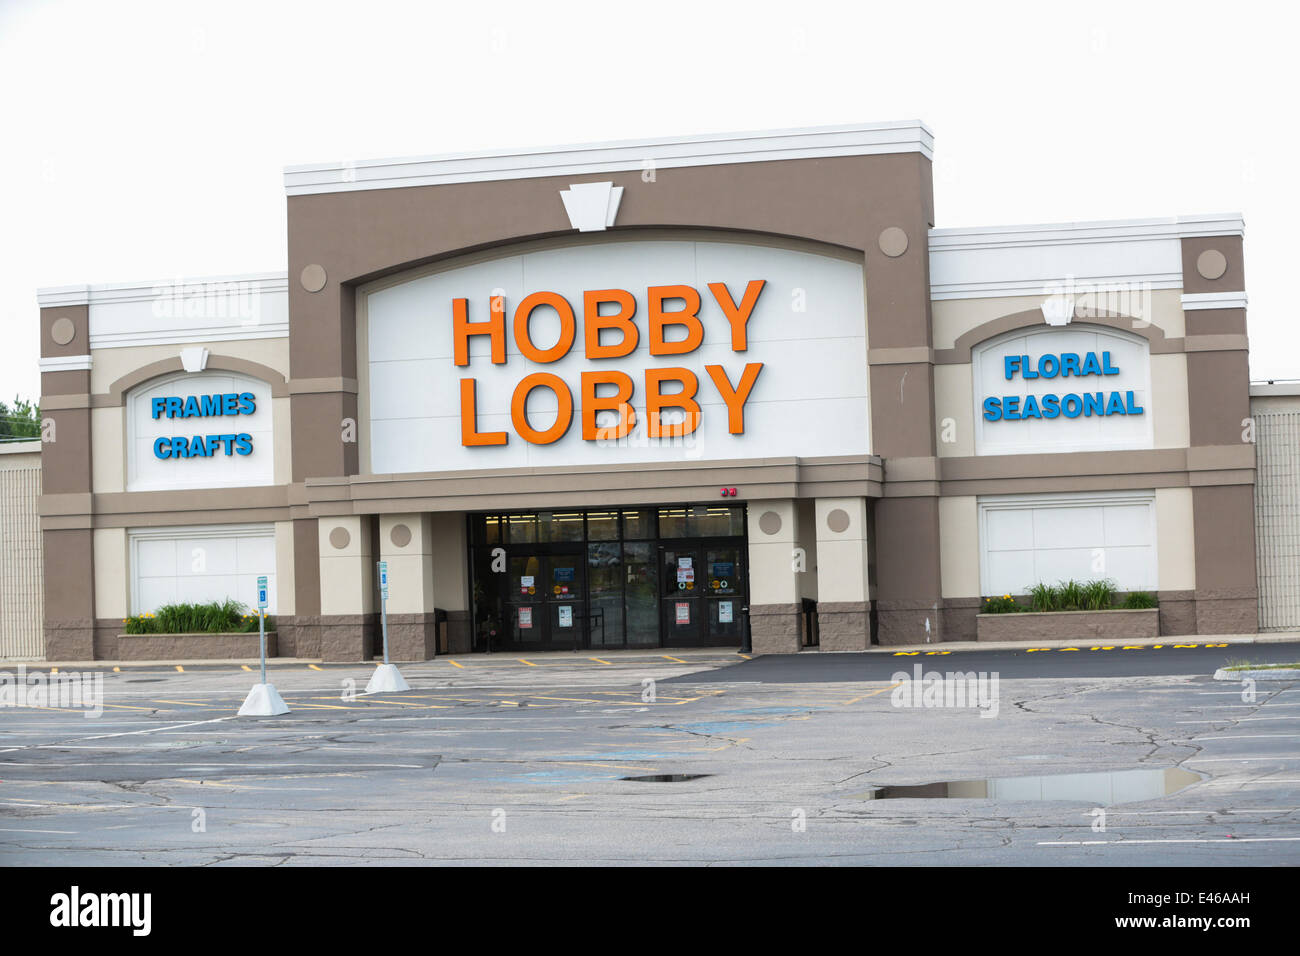 Manchester, New Hampshire, USA. 3rd July, 2014. The Hobby Lobby  contraceptive case goes before the United States Supreme Court in which  Hobby Lobby President Steve Green believes the company should not have